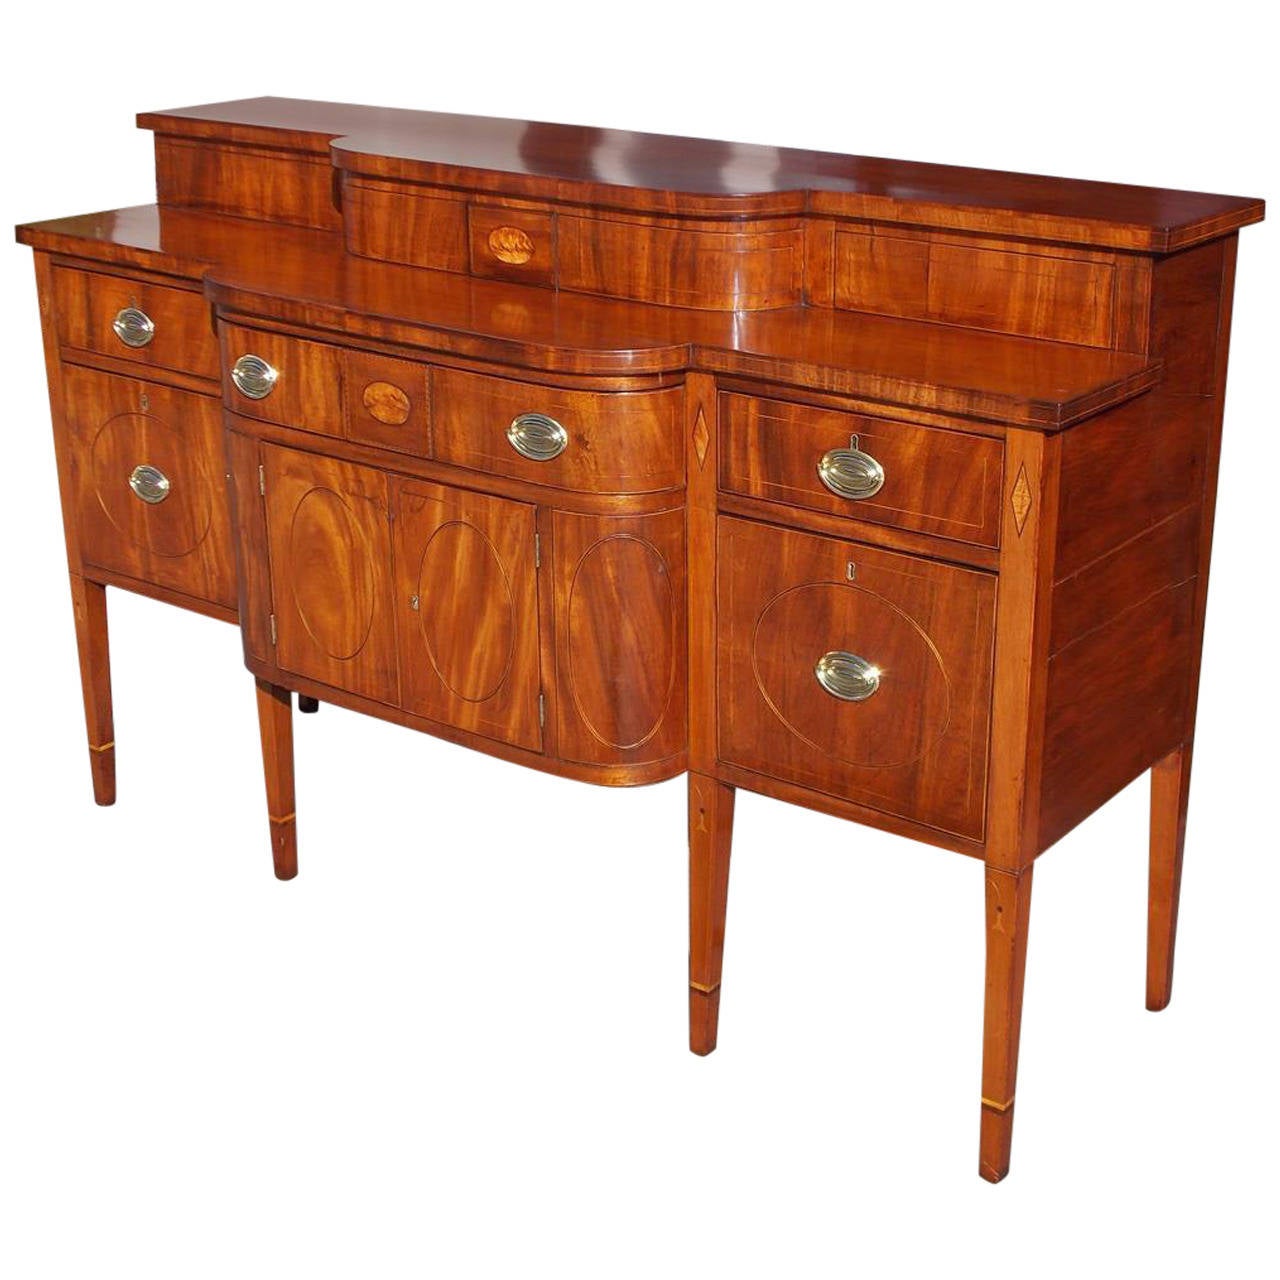 Charleston mahogany bow front stage top sideboard with birch oval and diamond inlays, bell-flowers, rosewood dots, cherry sides, and six drawers with lower cabinet terminating on cuffed tapered legs, Circa 1800.